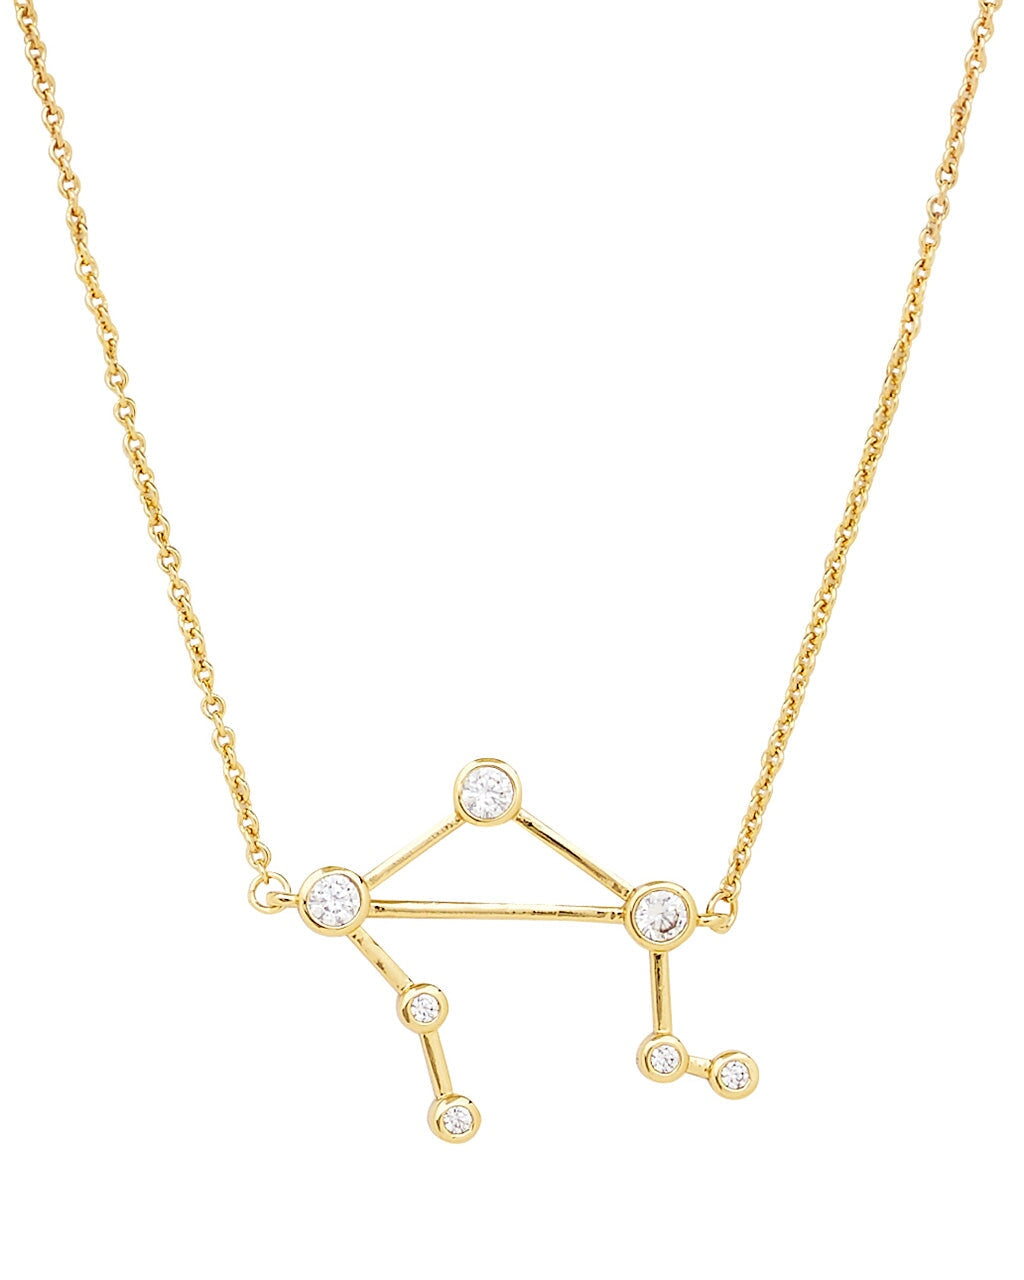 'When Stars Align' Constellation Necklace Necklace Sterling Forever Gold Libra (Sept 23 - Oct 22) 